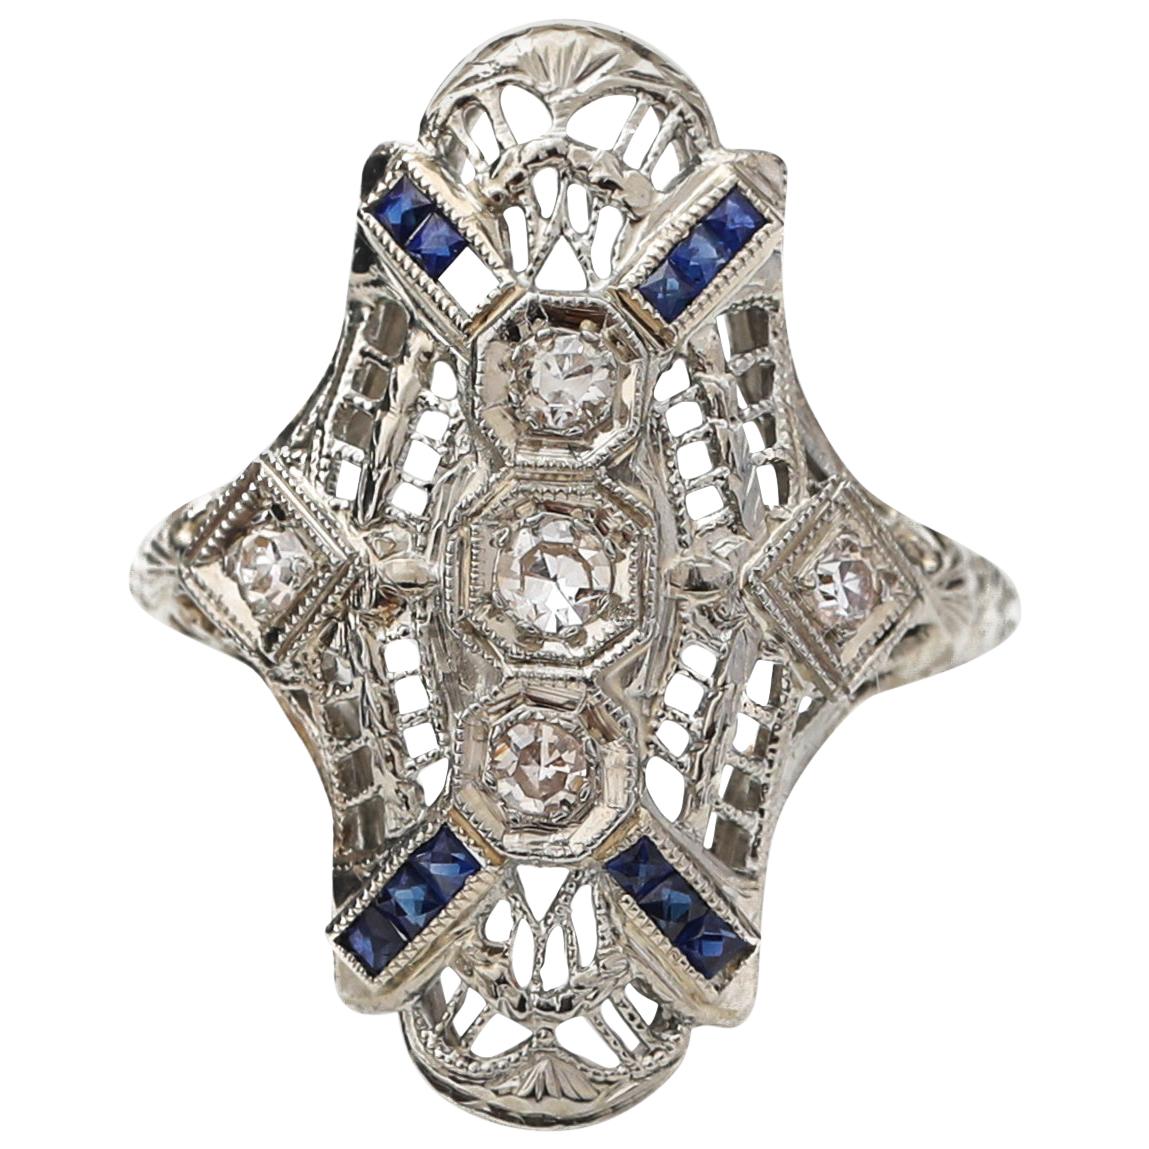 Platinum and Gold Shield Ring with Diamonds and Sapphires, circa 1920s